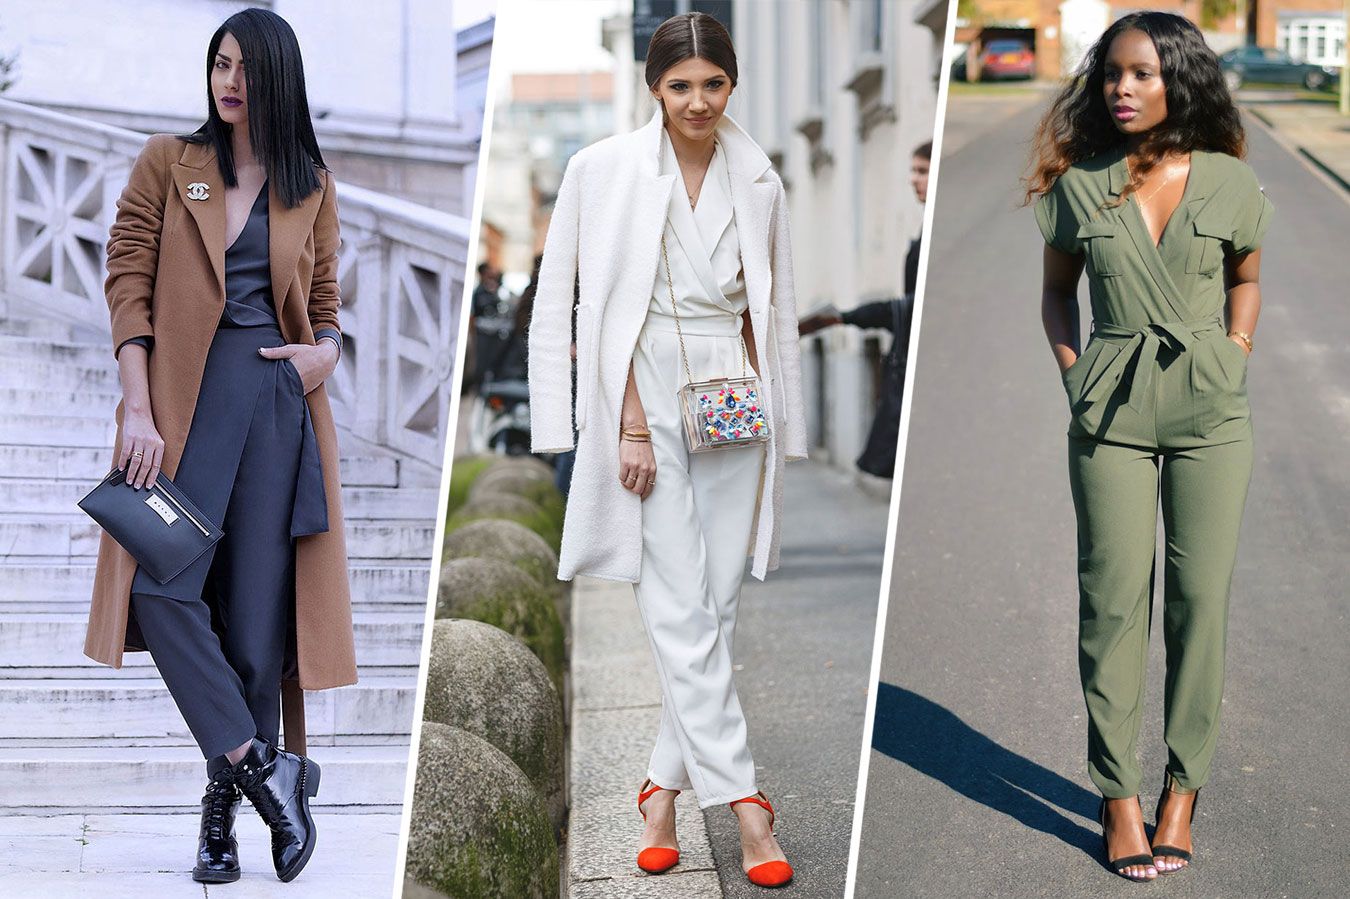 How to Wear and Style Jumpsuits